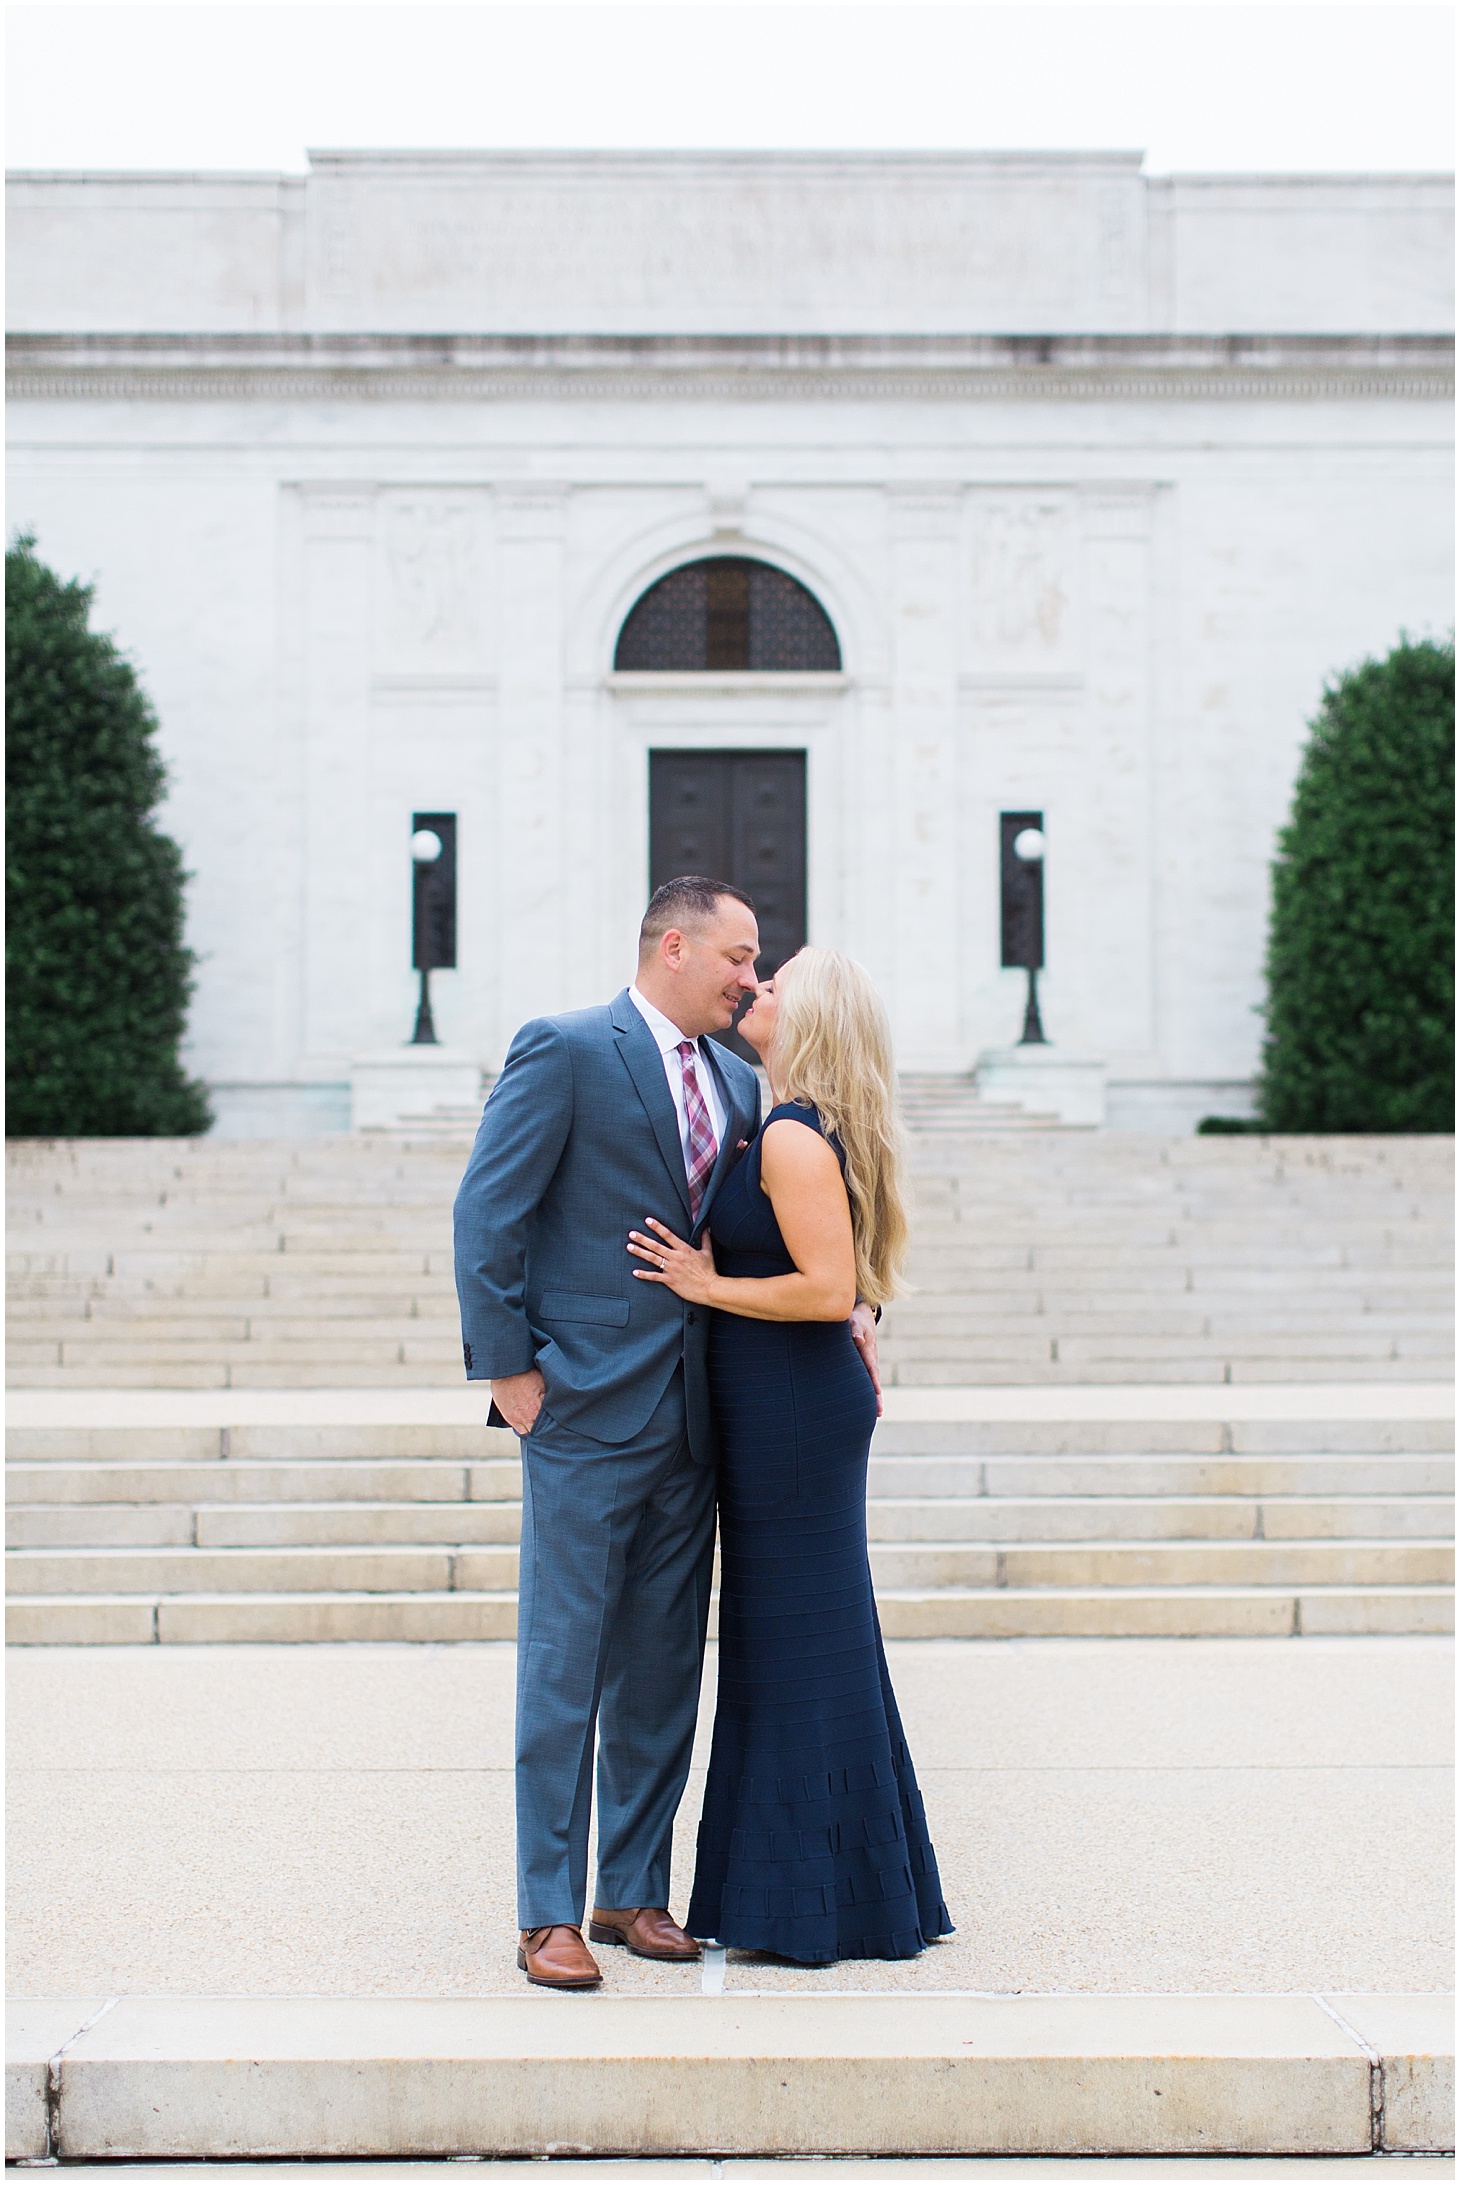 romantic-engagement-shoot-around-the-beautiful-d-c-monuments-by-sarah-bradshaw-photography_0007